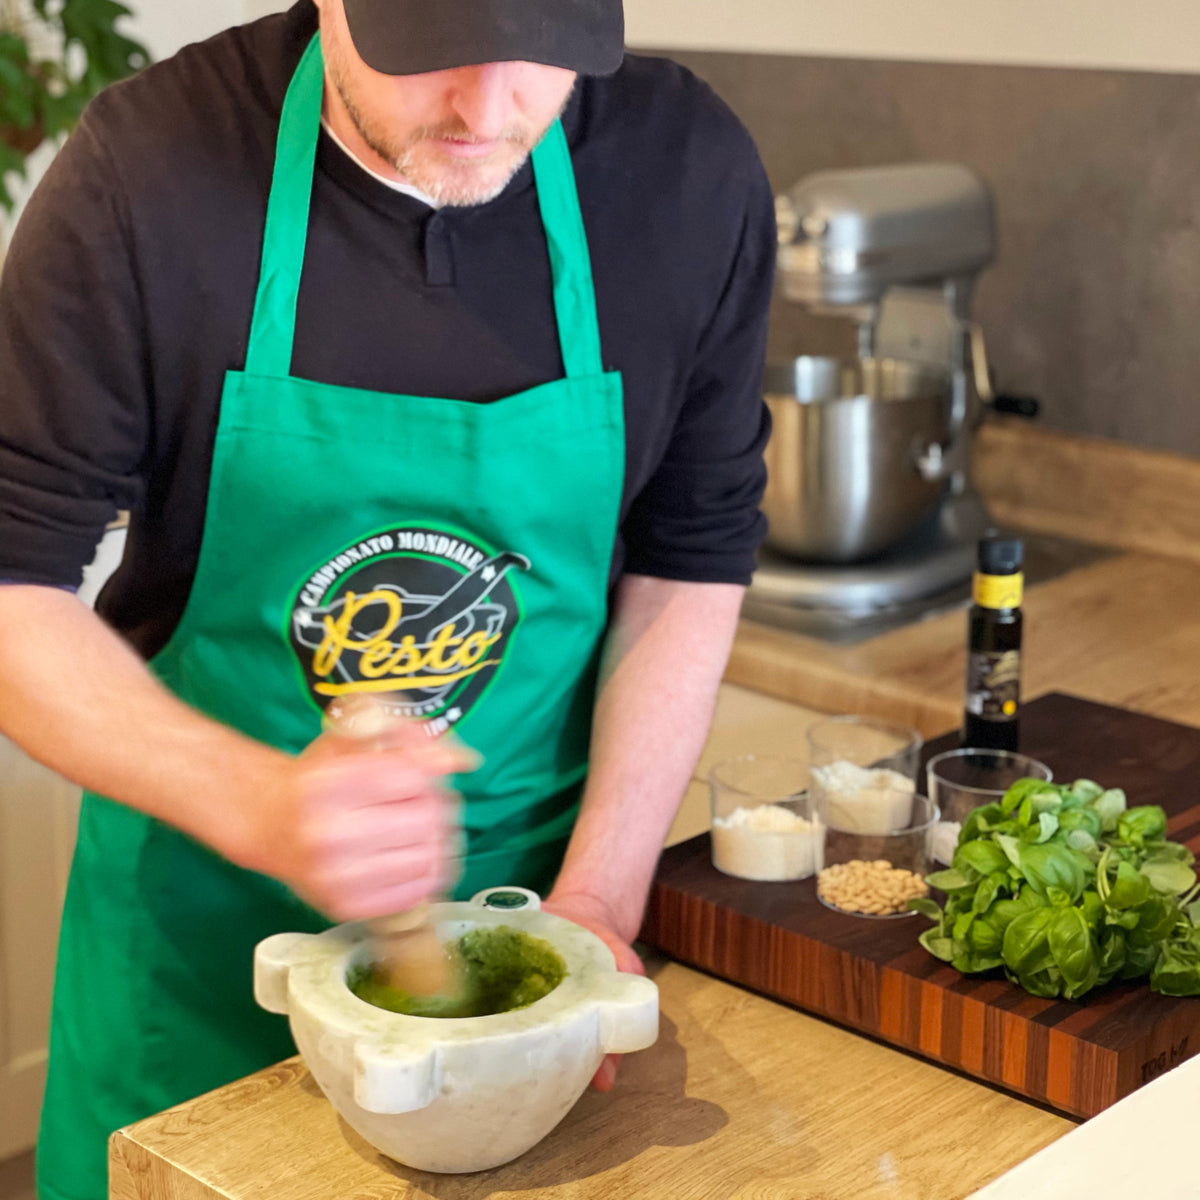 Michael Hawking competition at the World Pesto Championships